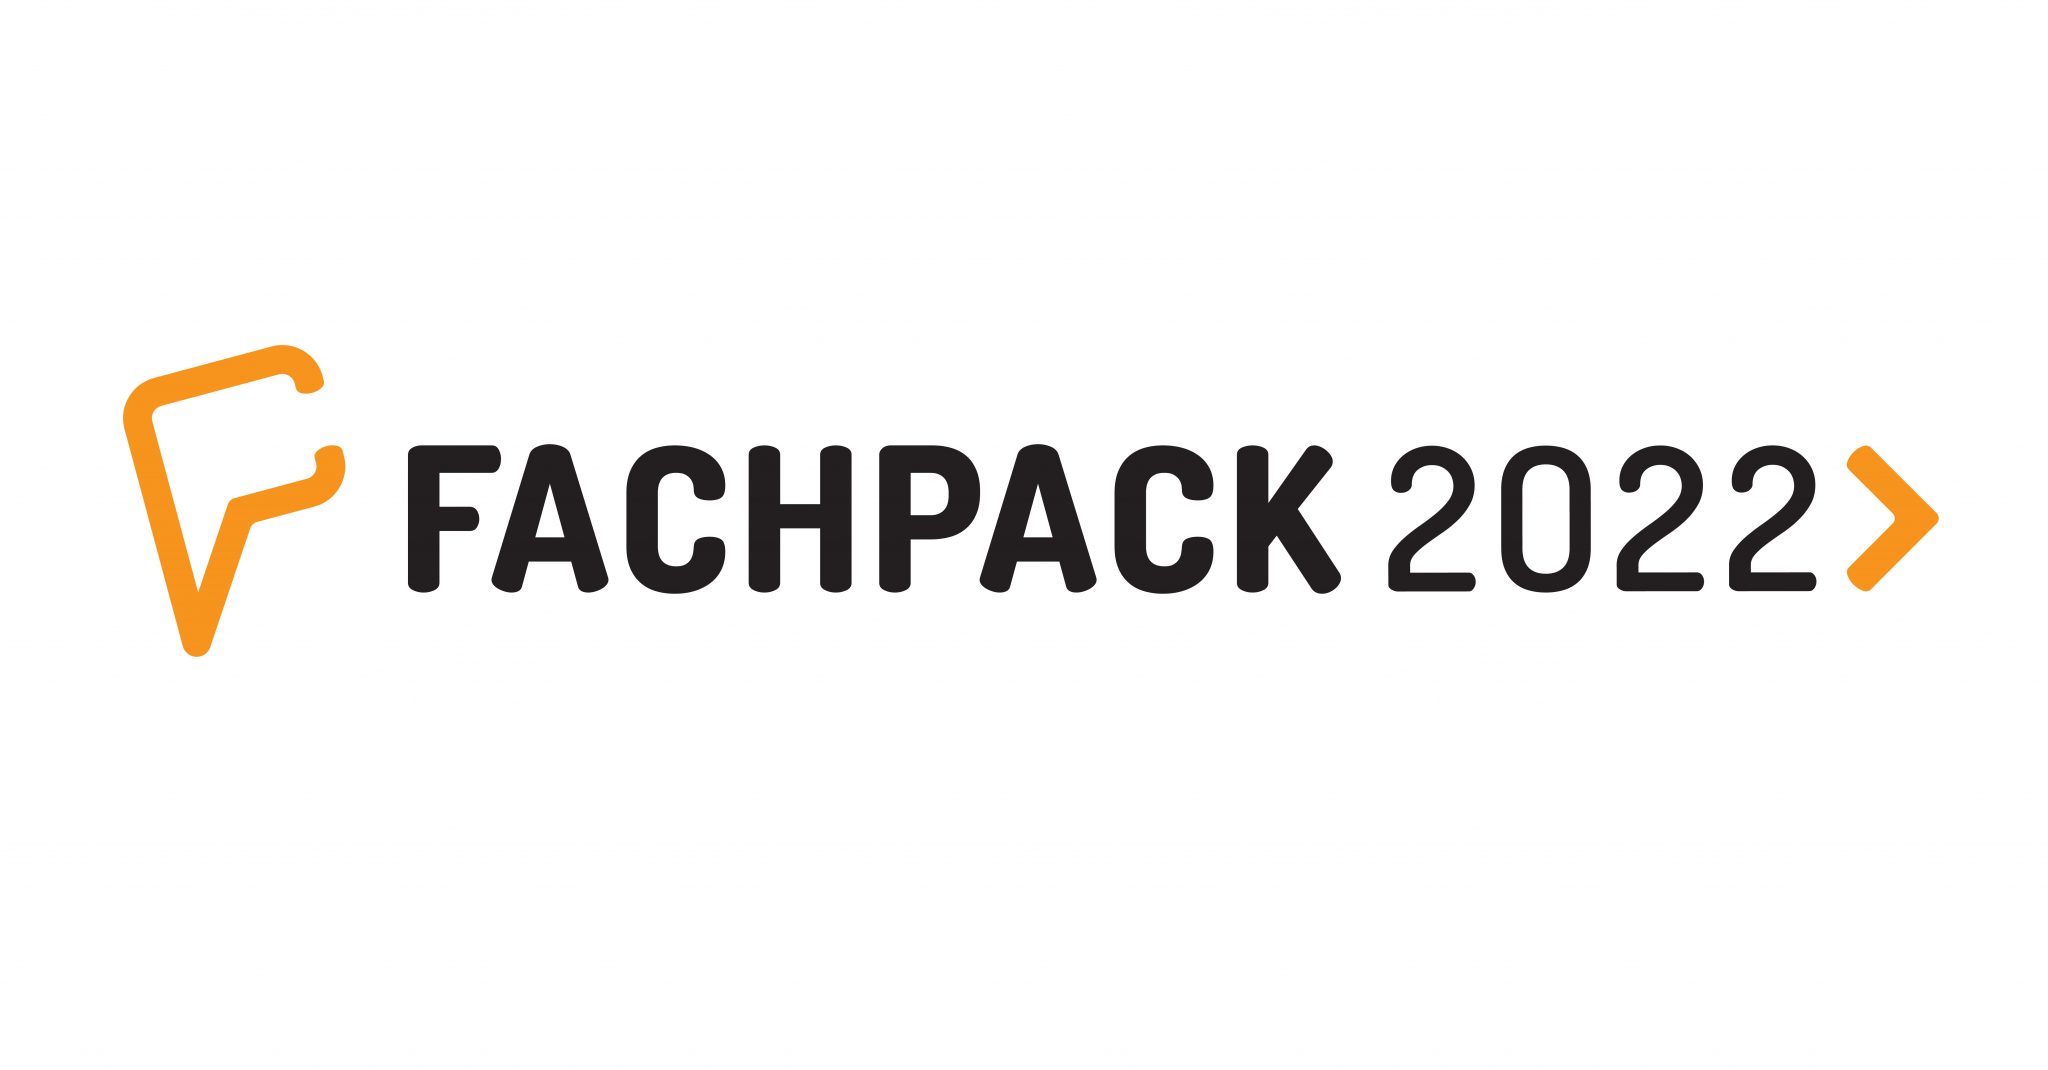 Fachpack2022